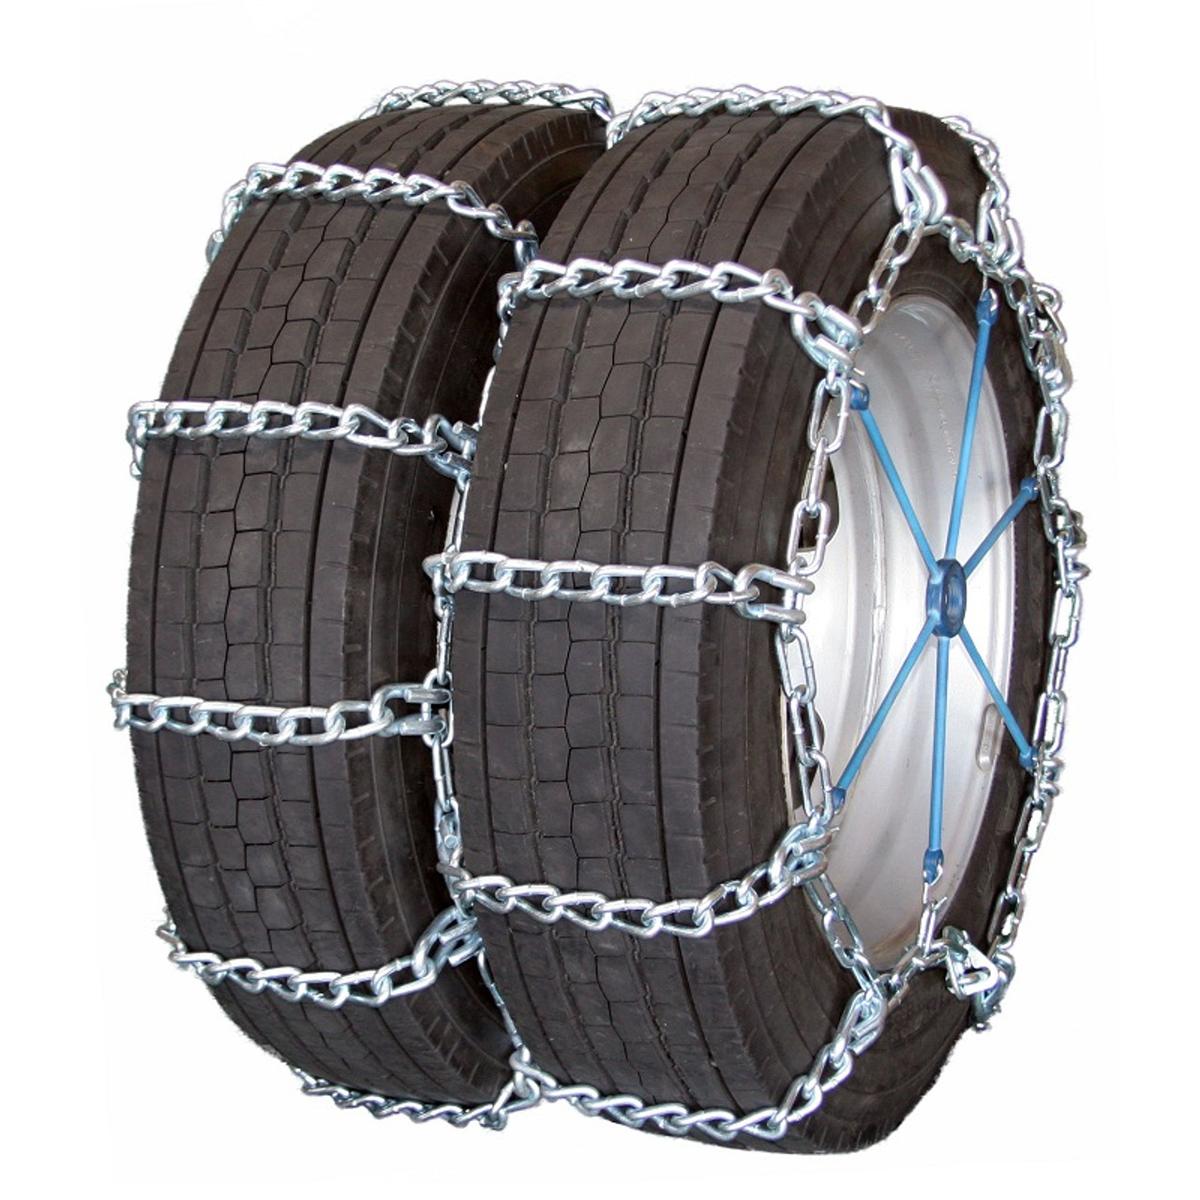 Mud Service Dual 315/75-16 Truck Tire Chains